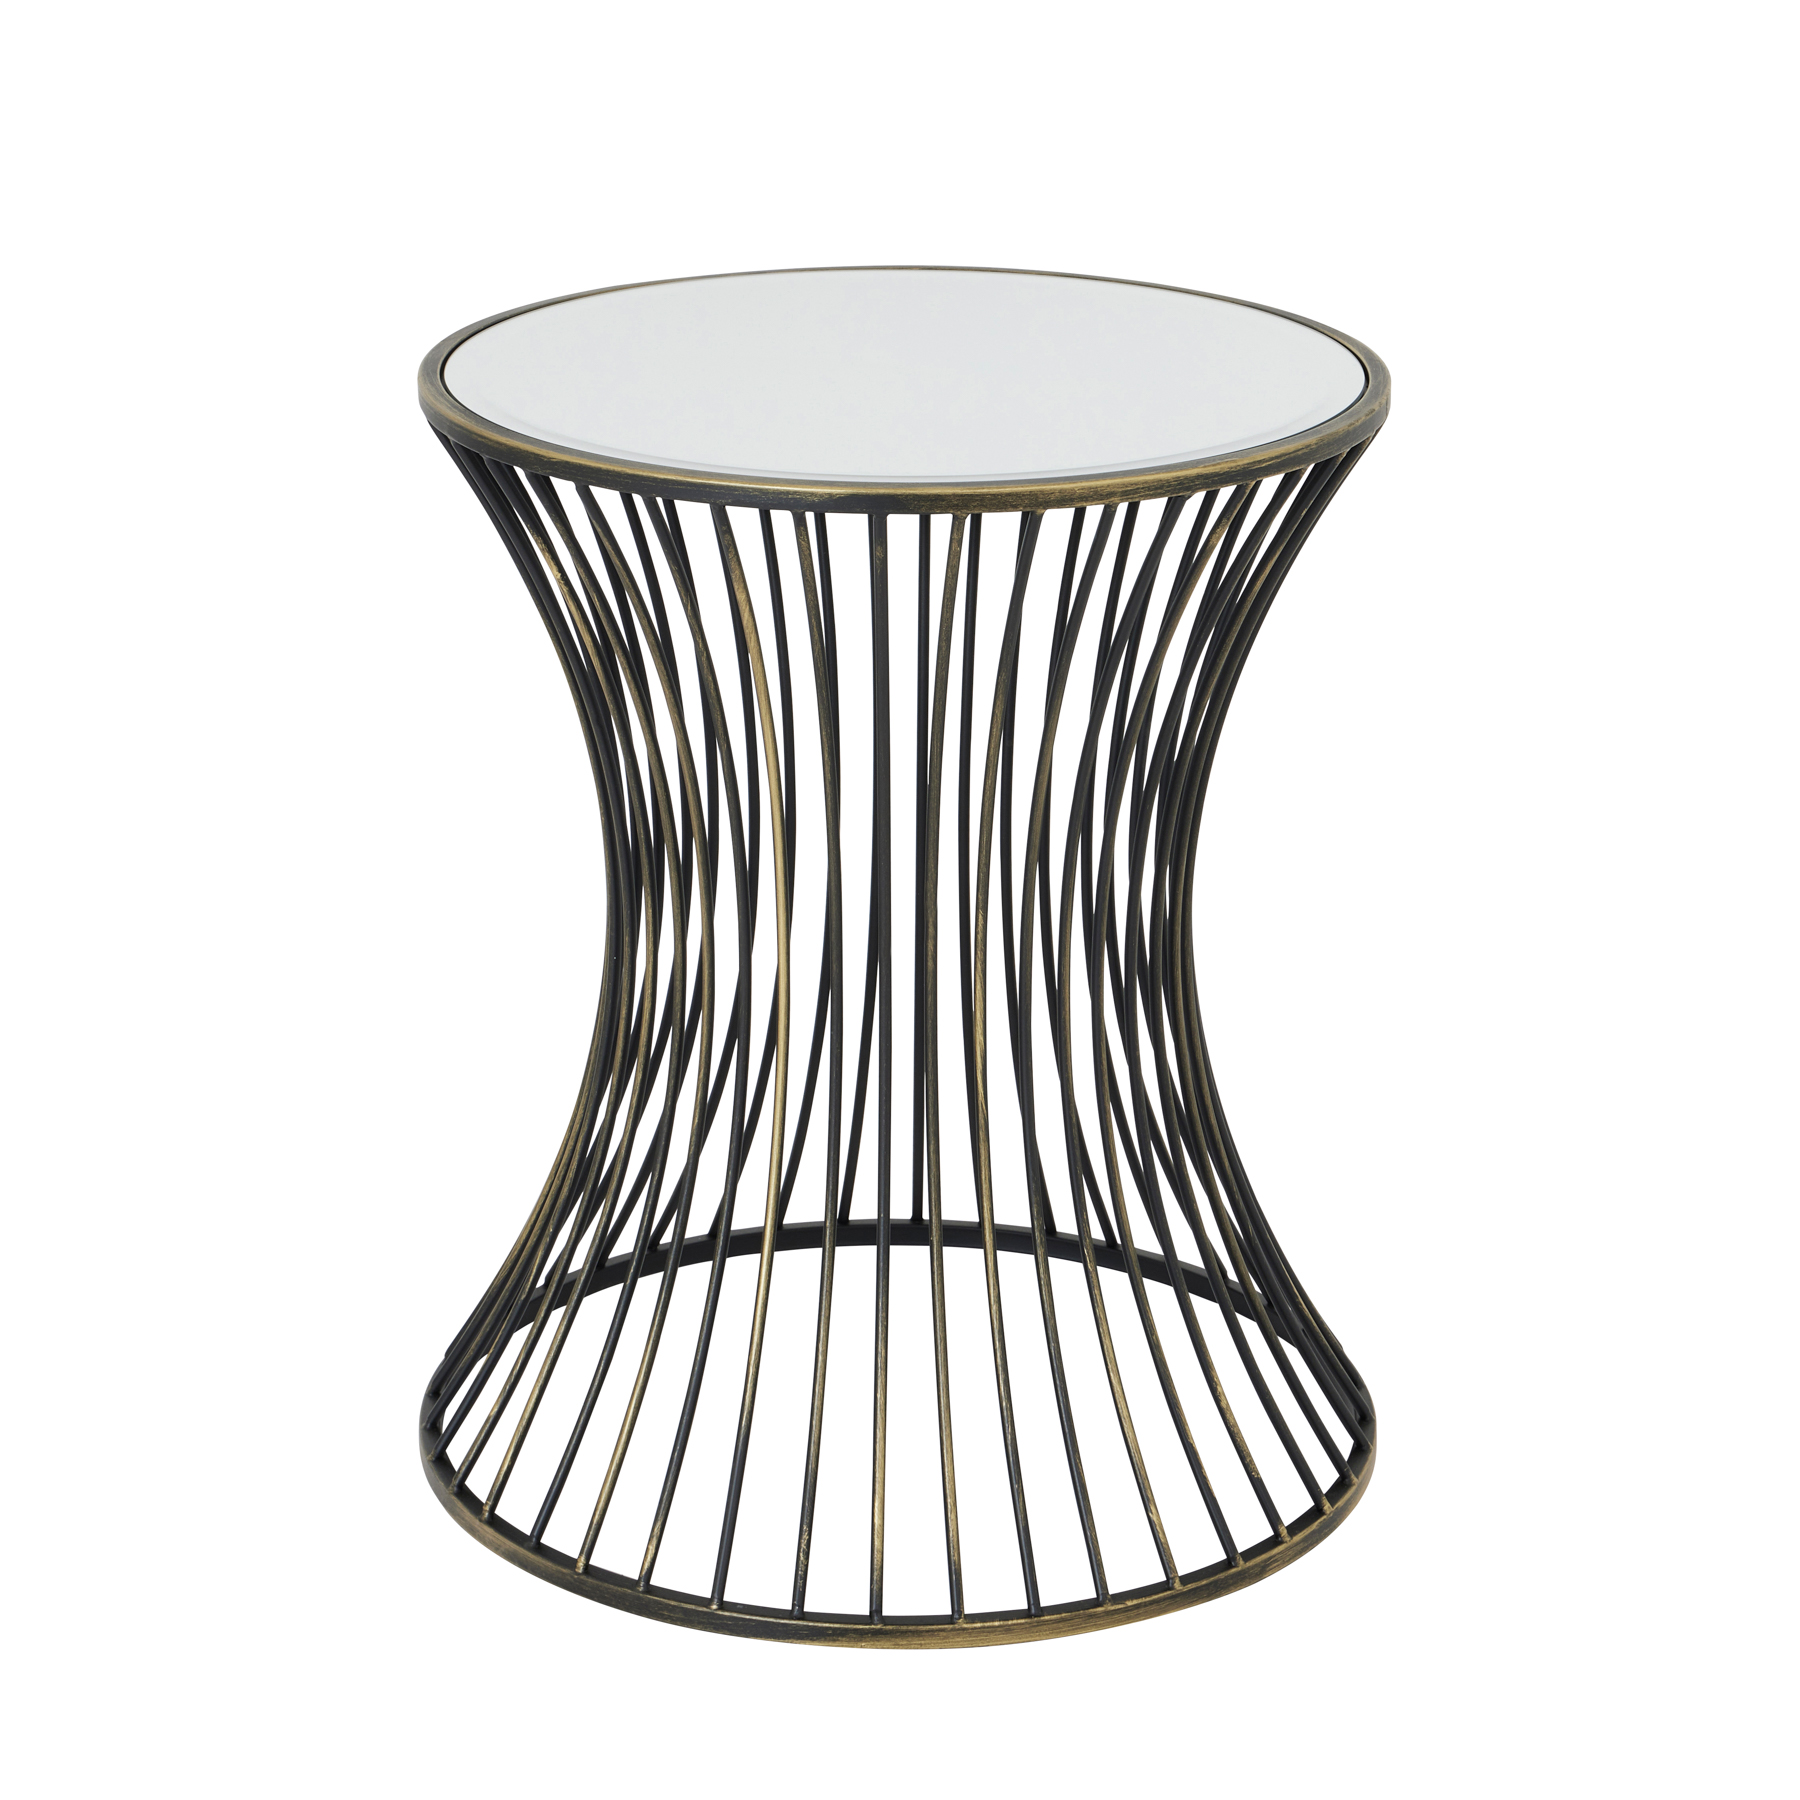 Concaved Mirrored Side Table - Image 1